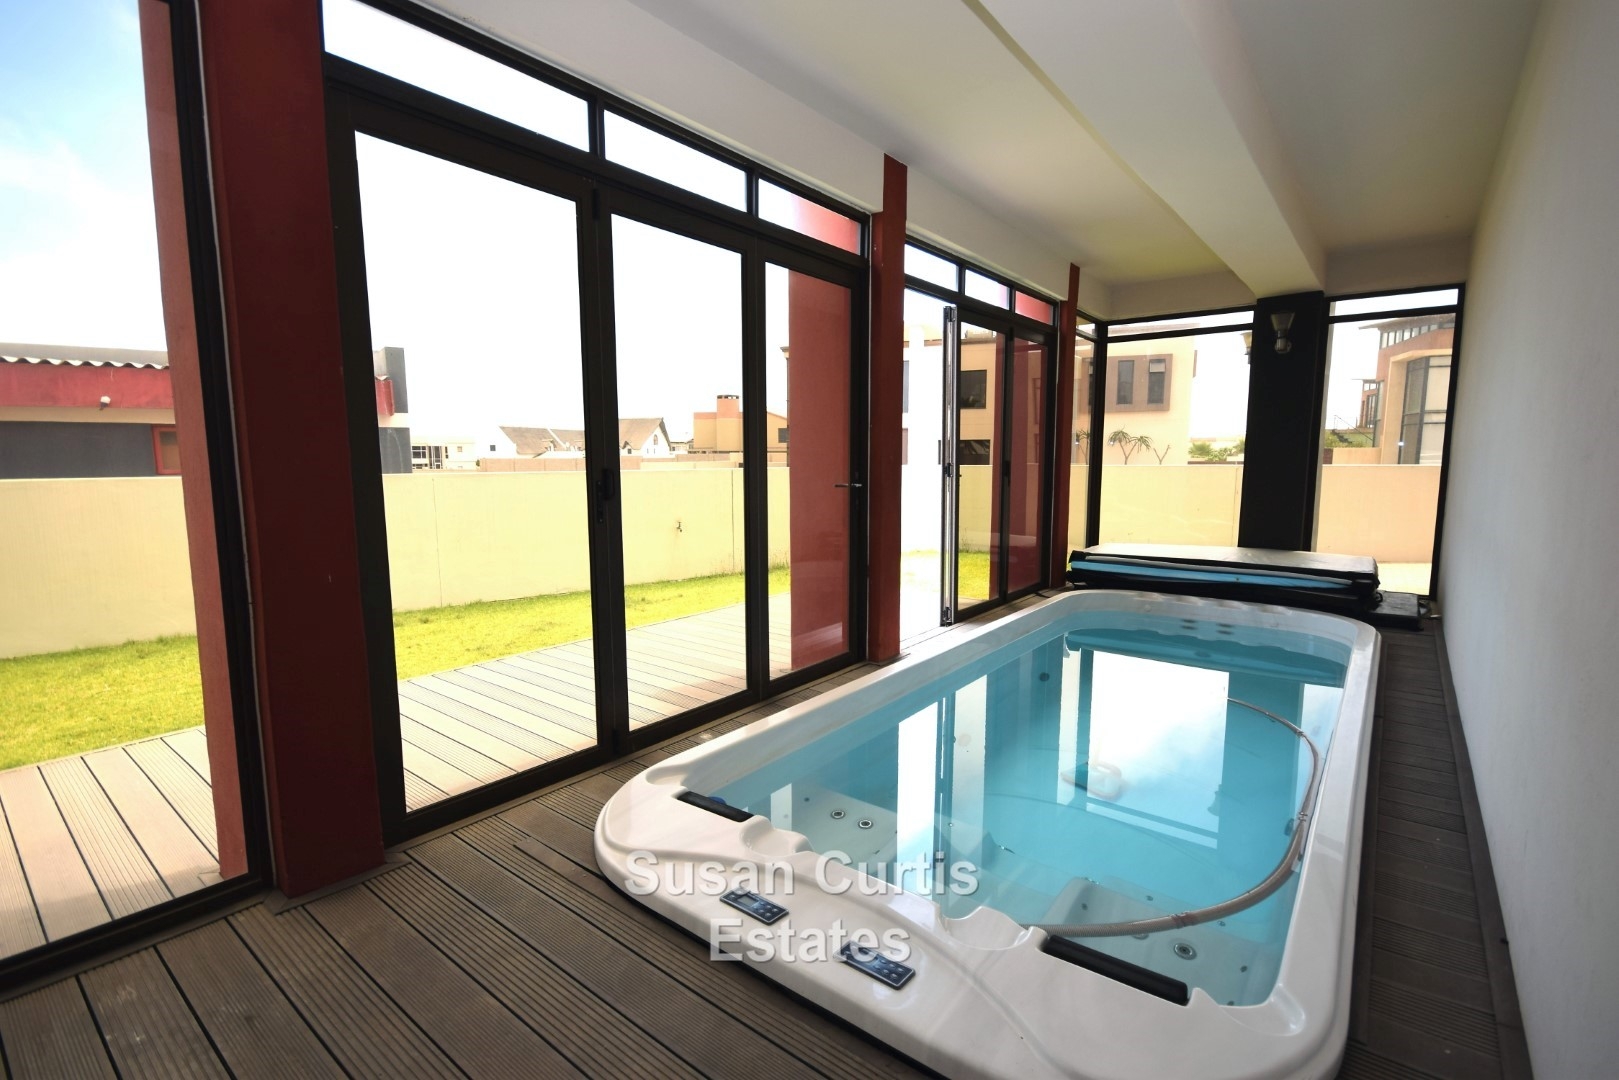 Pool/Jacuzzi room with stack doors towards undercover patio